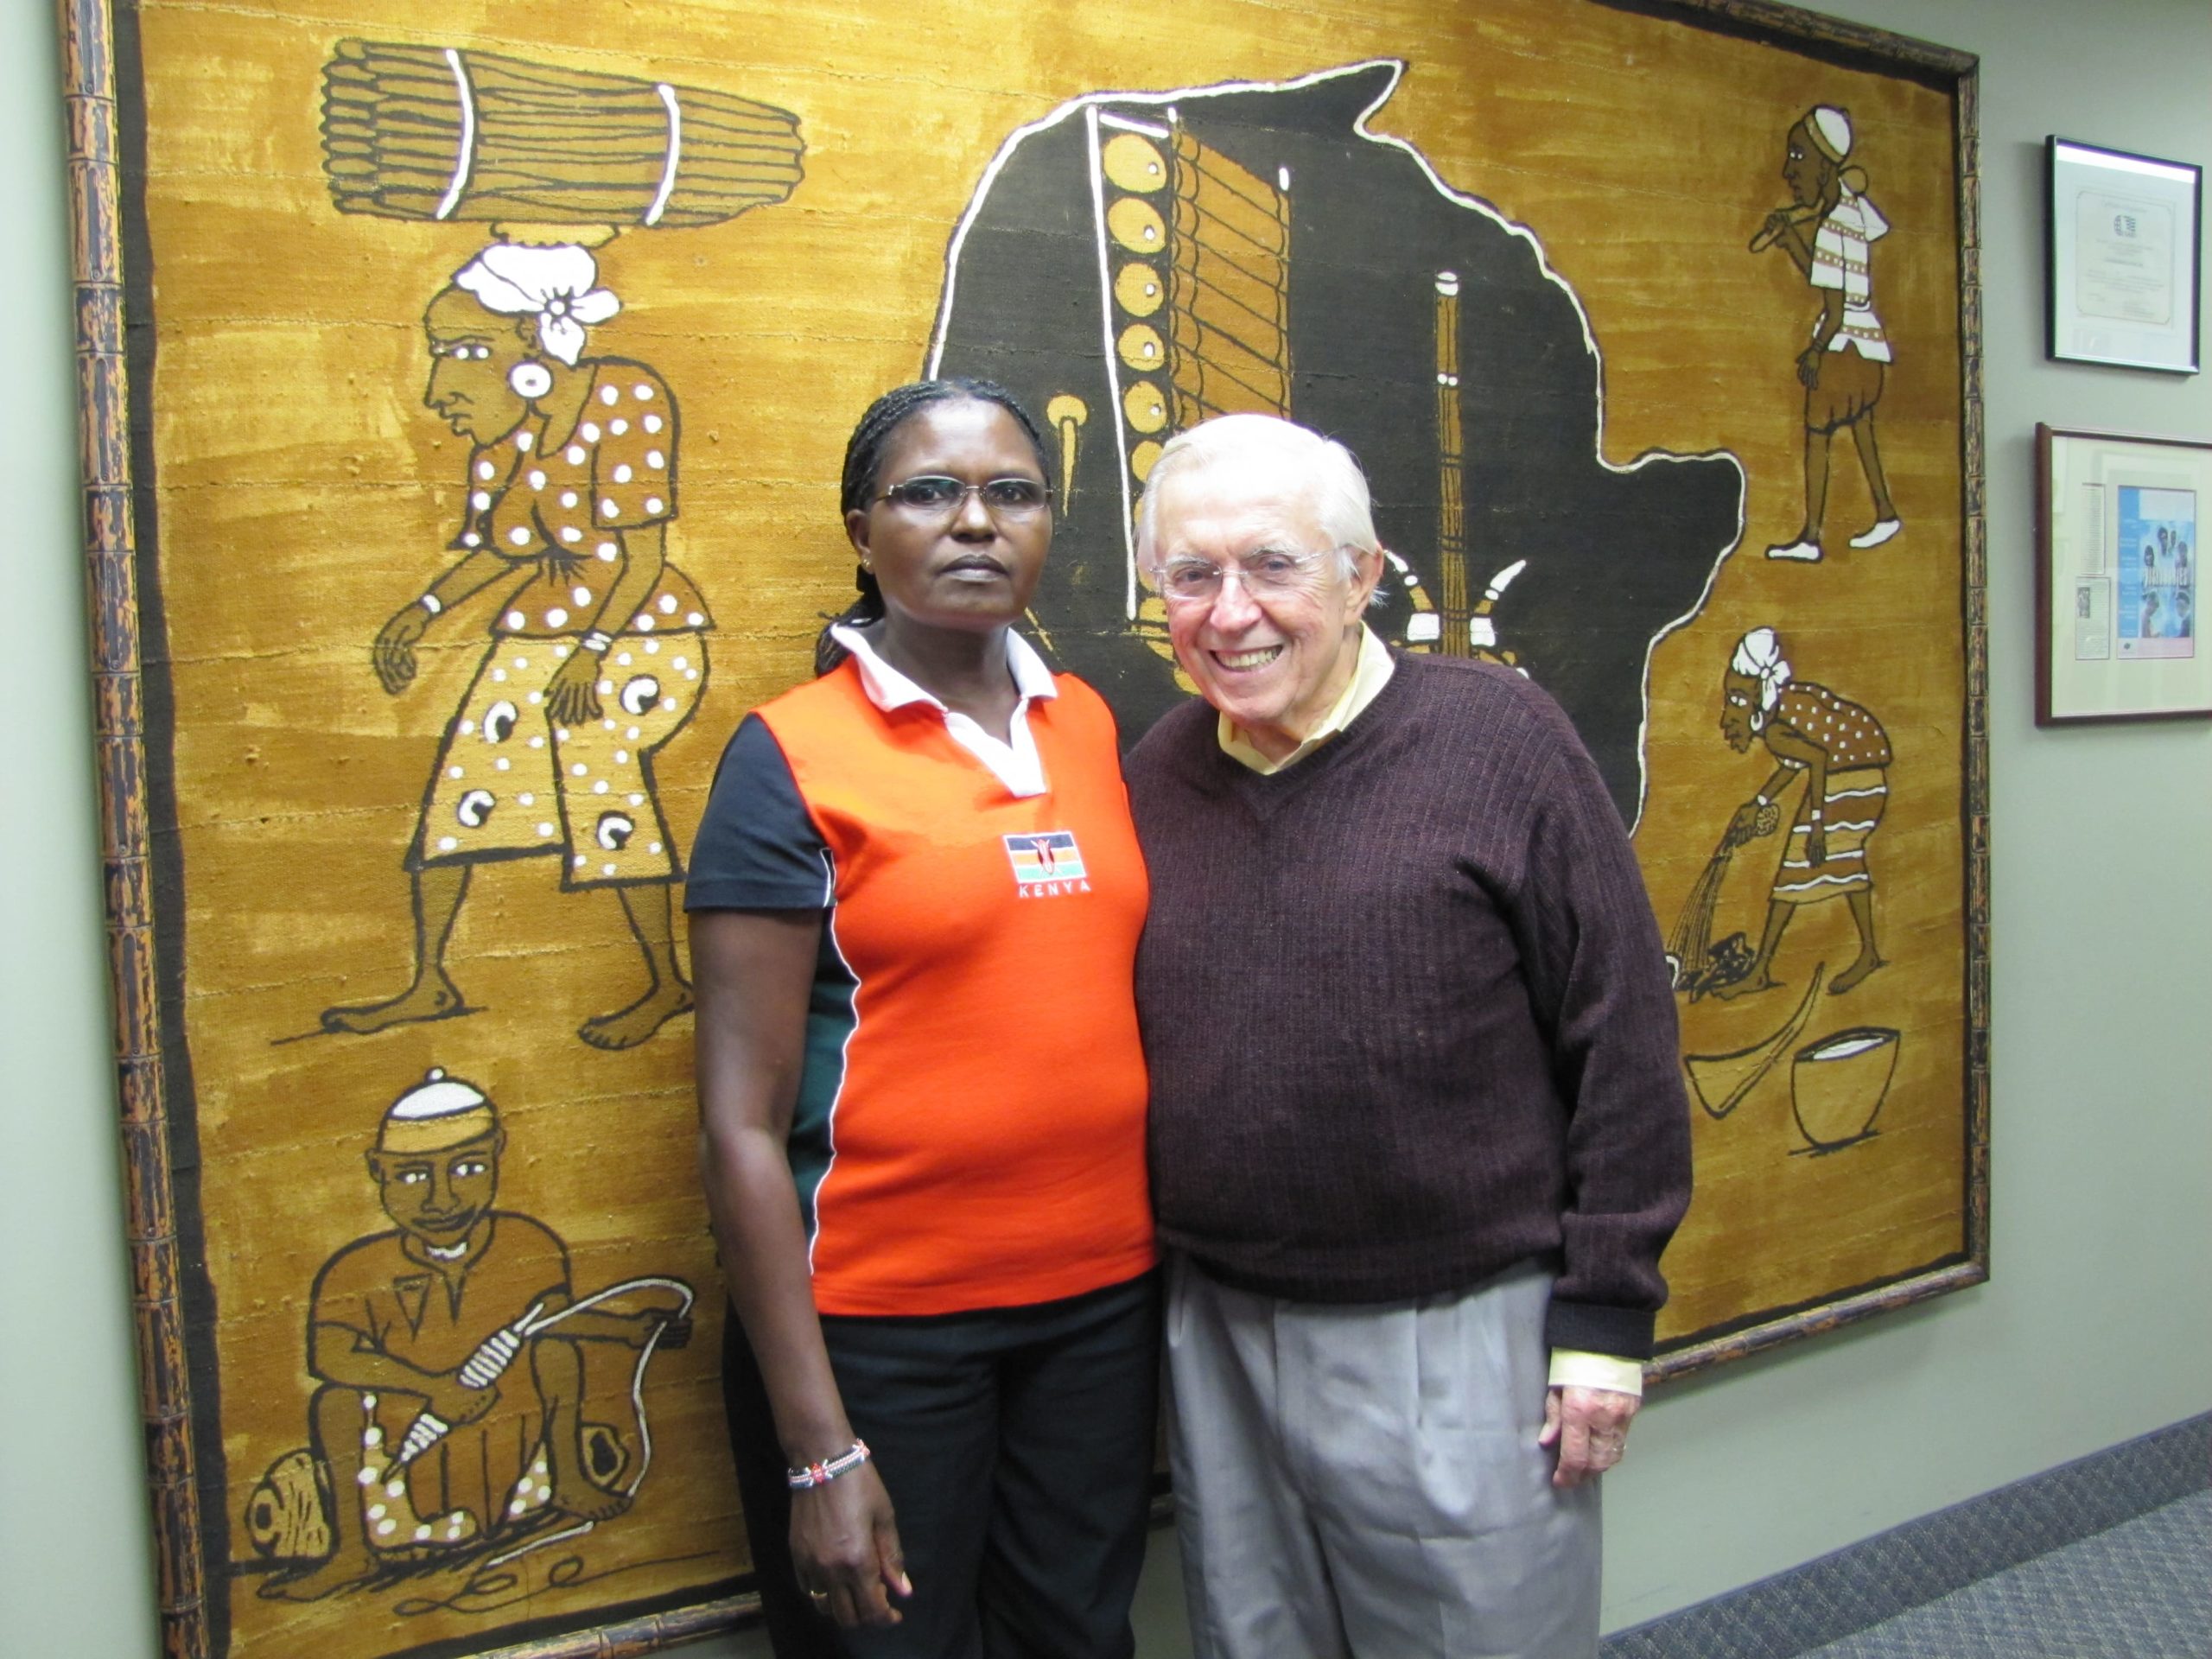 Bread and Water for Africa® founder Eugene “Gene” Krizek with Lewa Children’s Home founder and executive director Phyliss Keino, Bread and Water for Africa® international Spokesperson